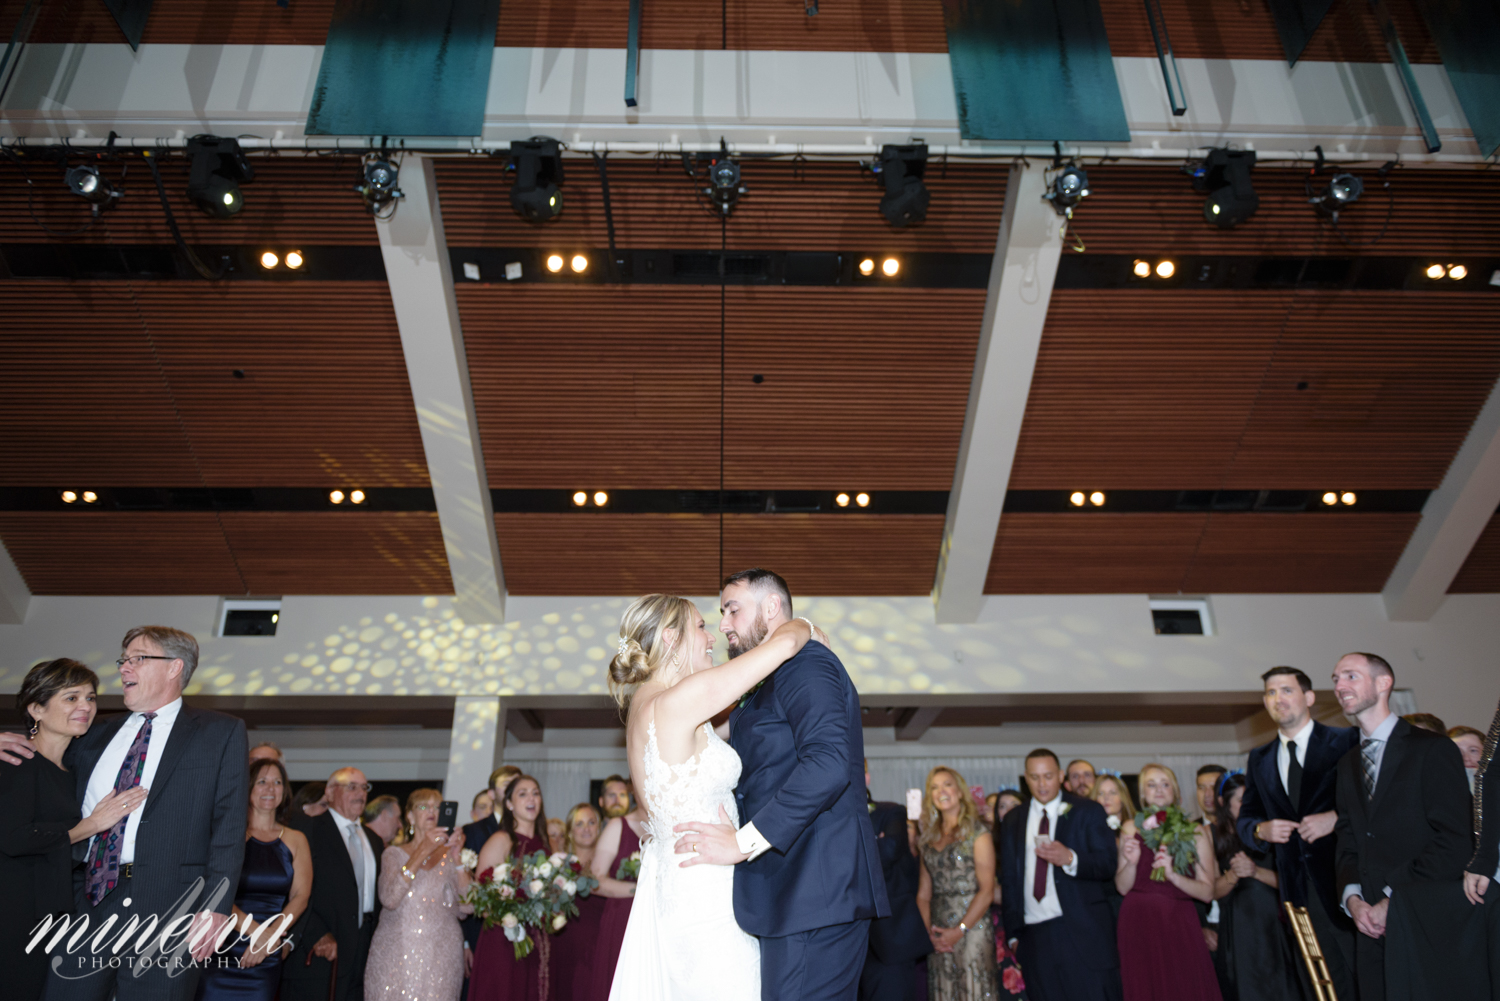 103_wedding-photography_broward-center-for-the-performing-arts_riverside-hotel_fort-lauderdale_south-florida_miami_browrad_palm-beach_orlando_central-florida